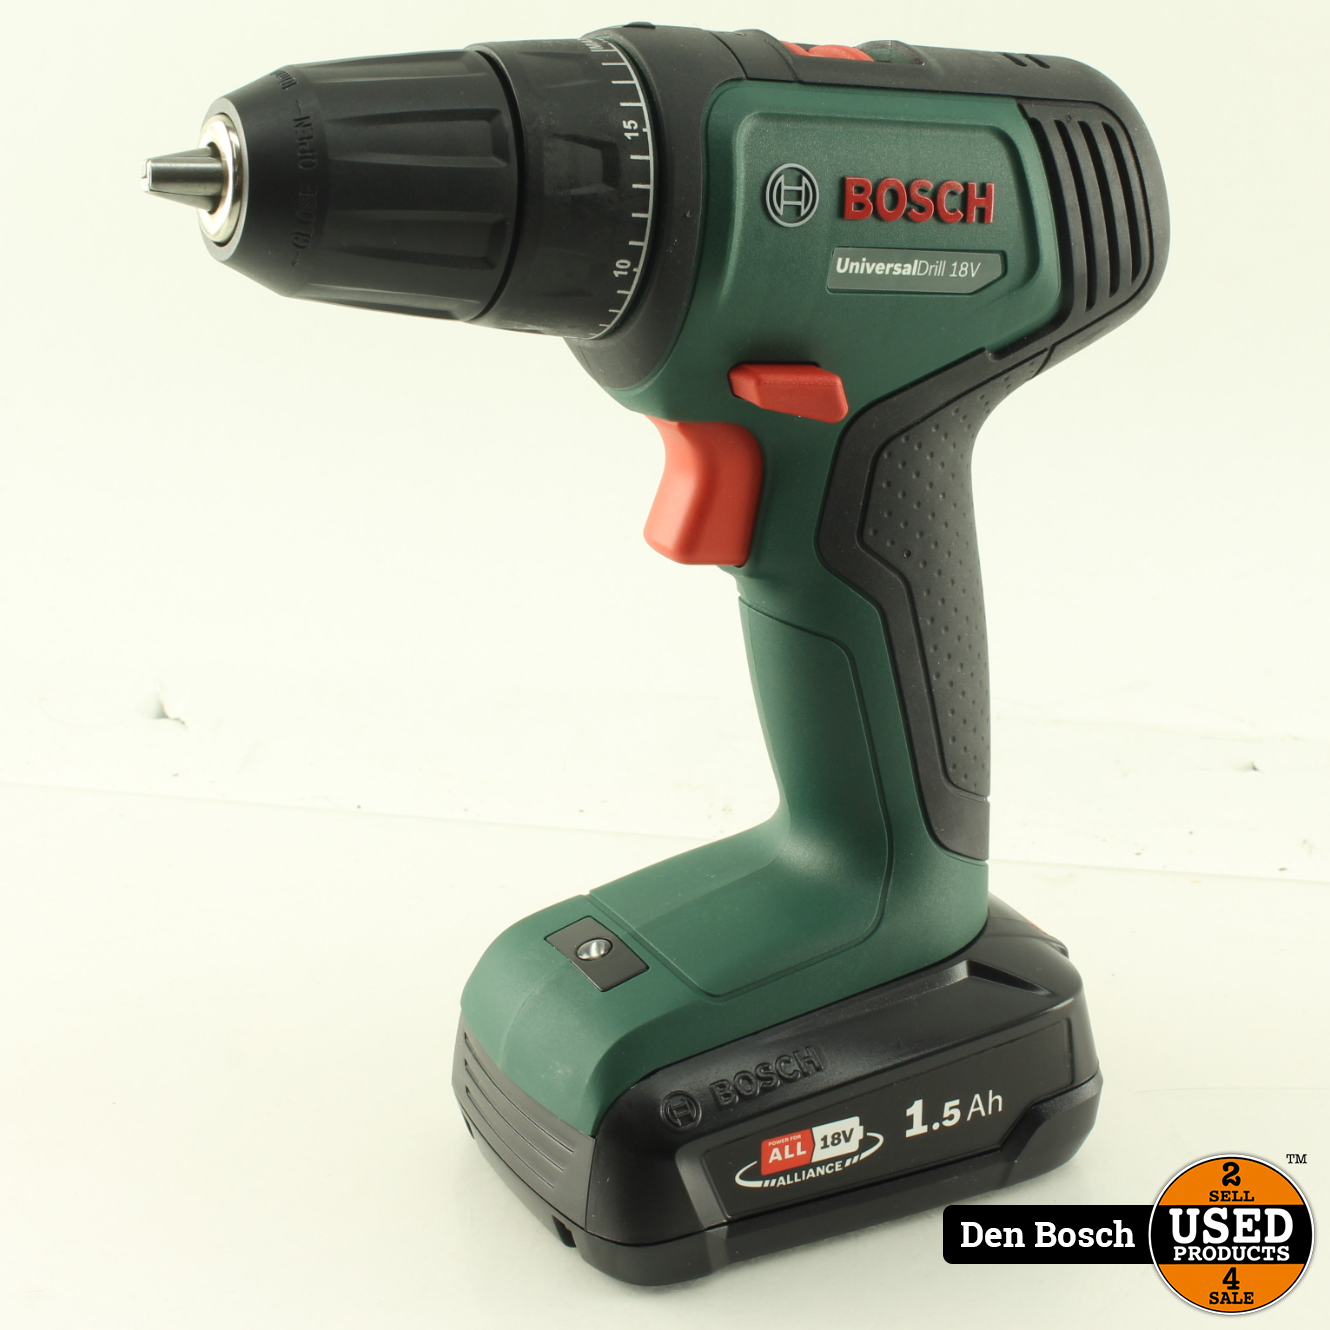 tong entiteit Cerebrum Bosch UniversalDrill 18V Boormachine + 4 Accus, Oplader en Systeembox -  Used Products Den Bosch